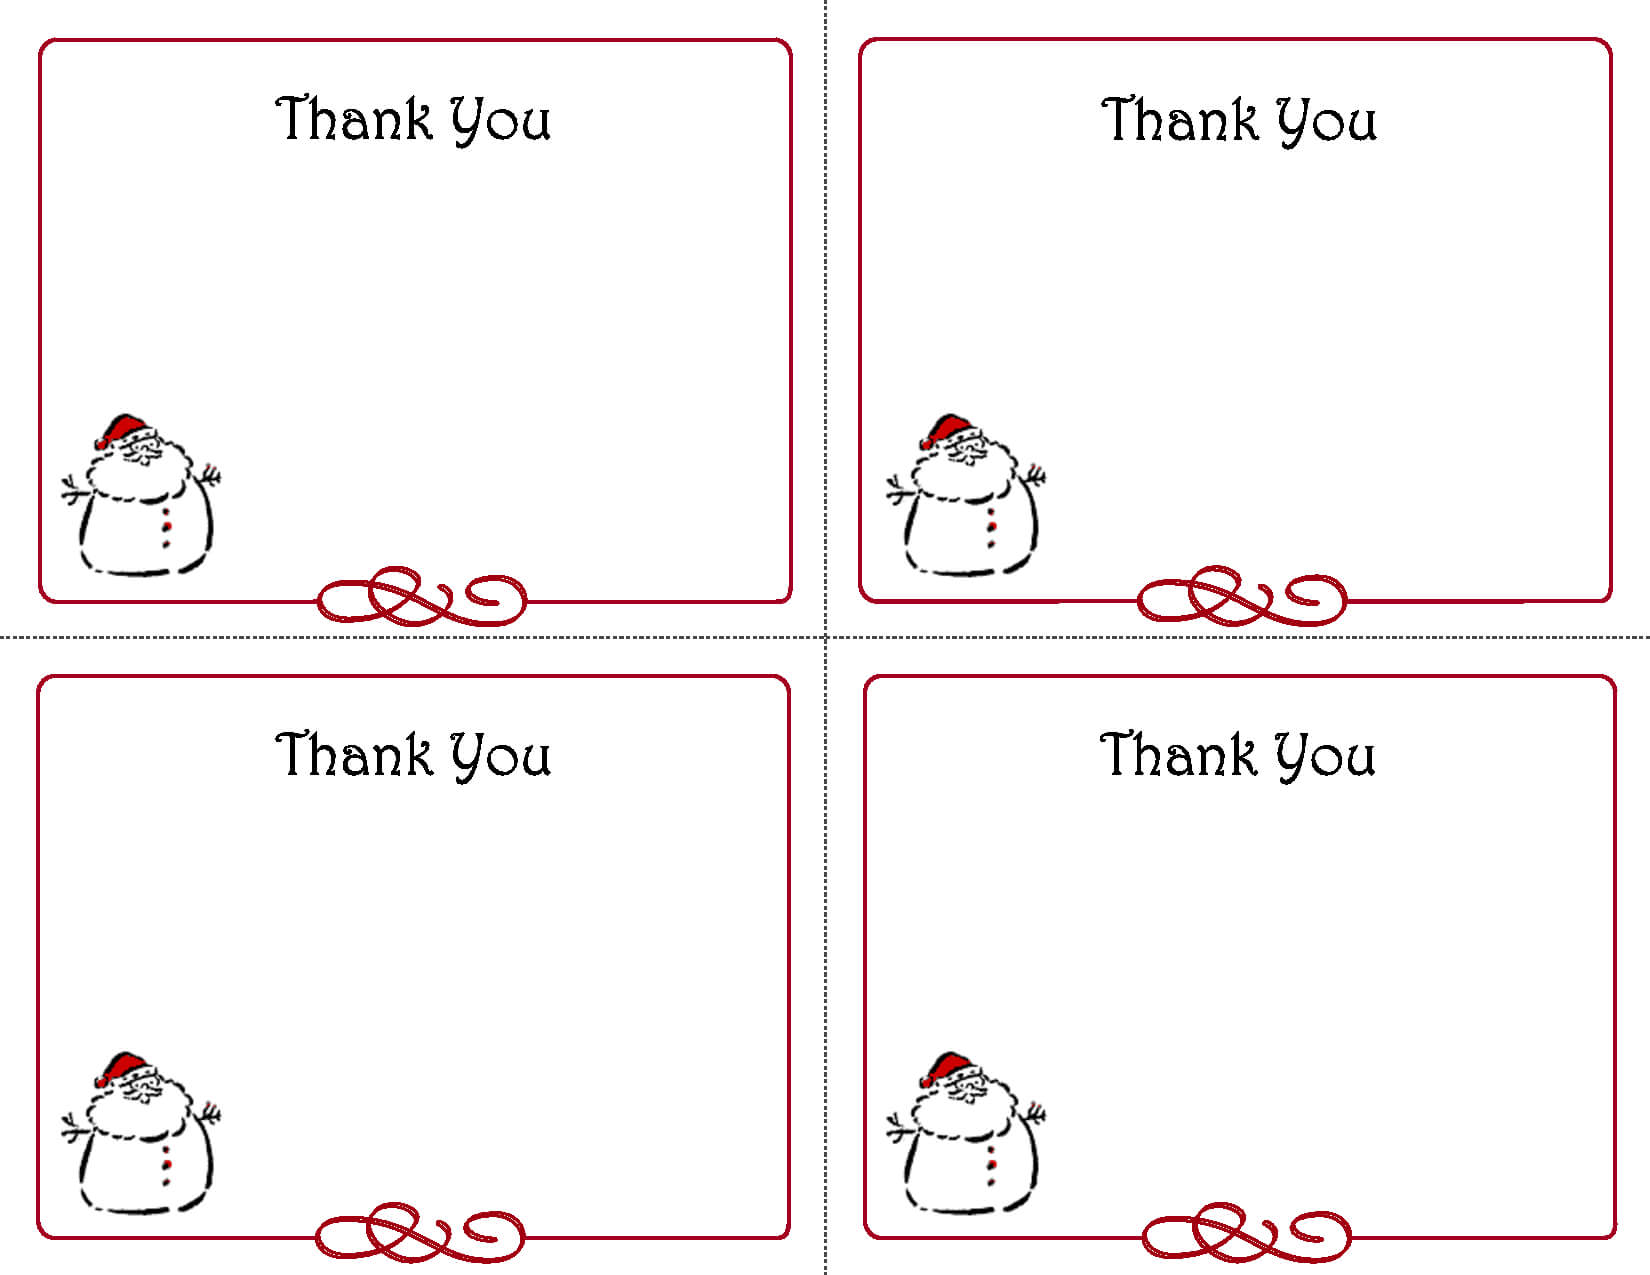 Free Thank You Cards Printable | Free Printable Holiday Gift Inside Template For Cards To Print Free